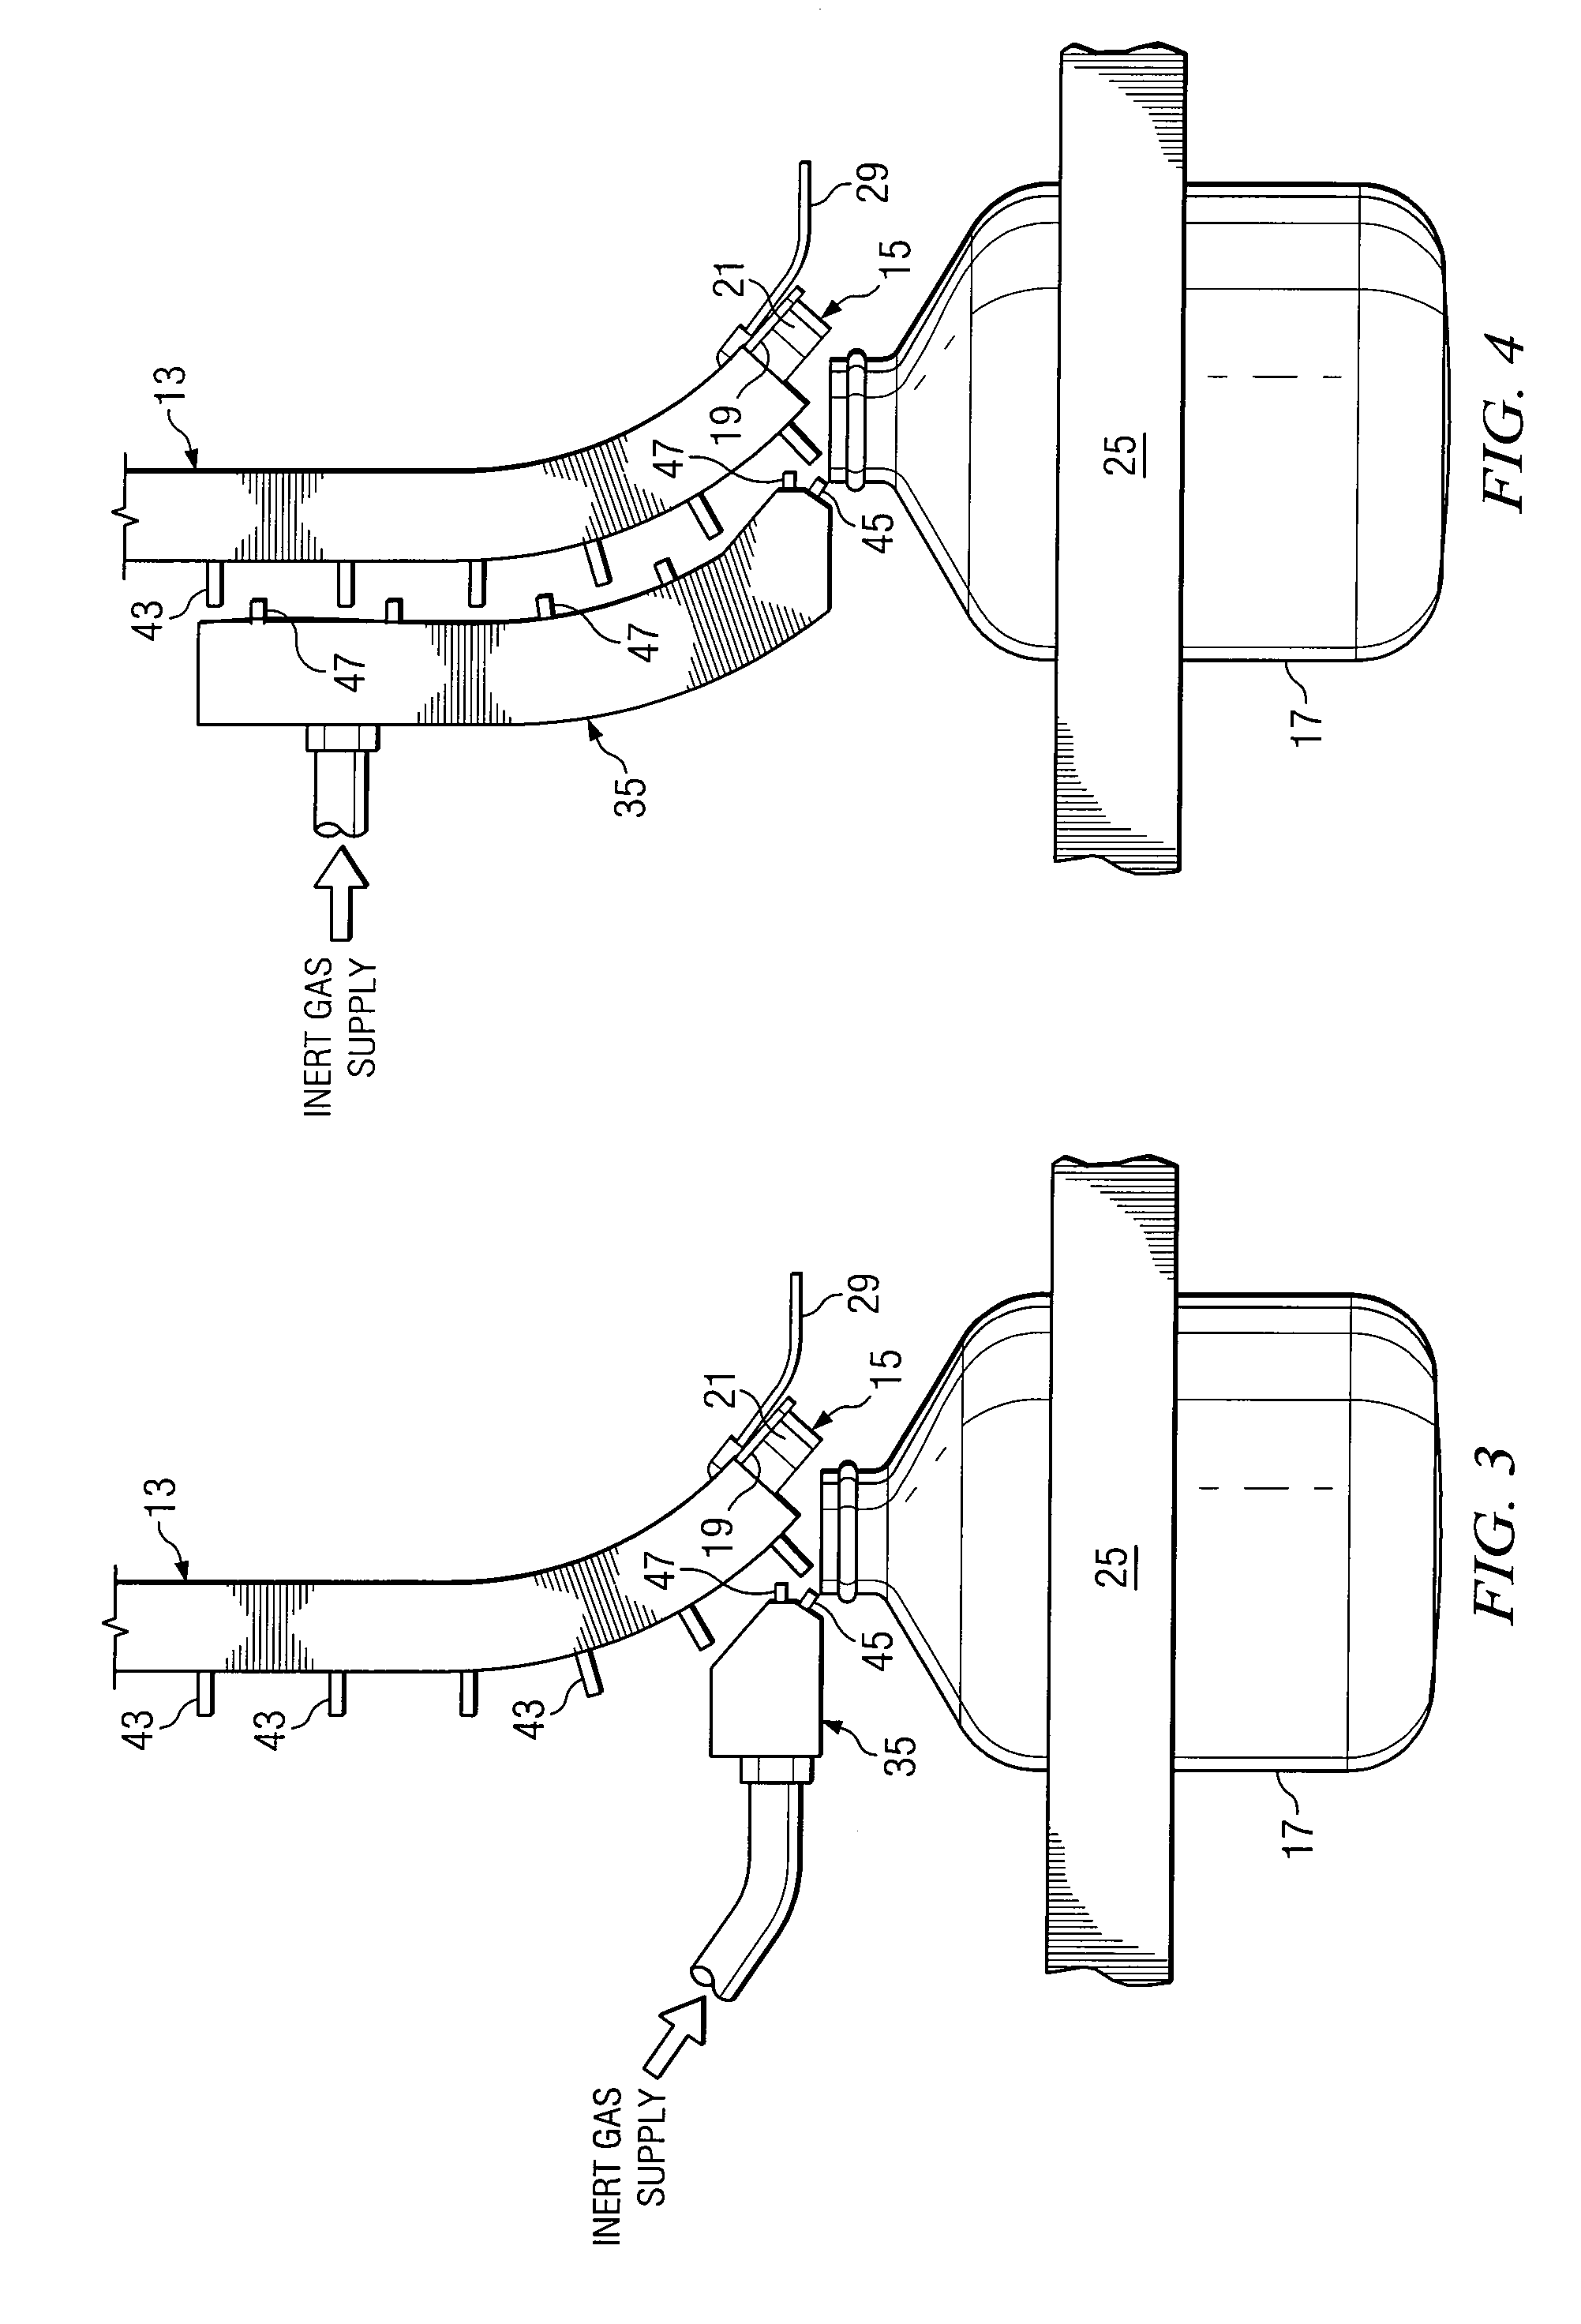 Method and Apparatus for Flushing a Container with an Inert Gas